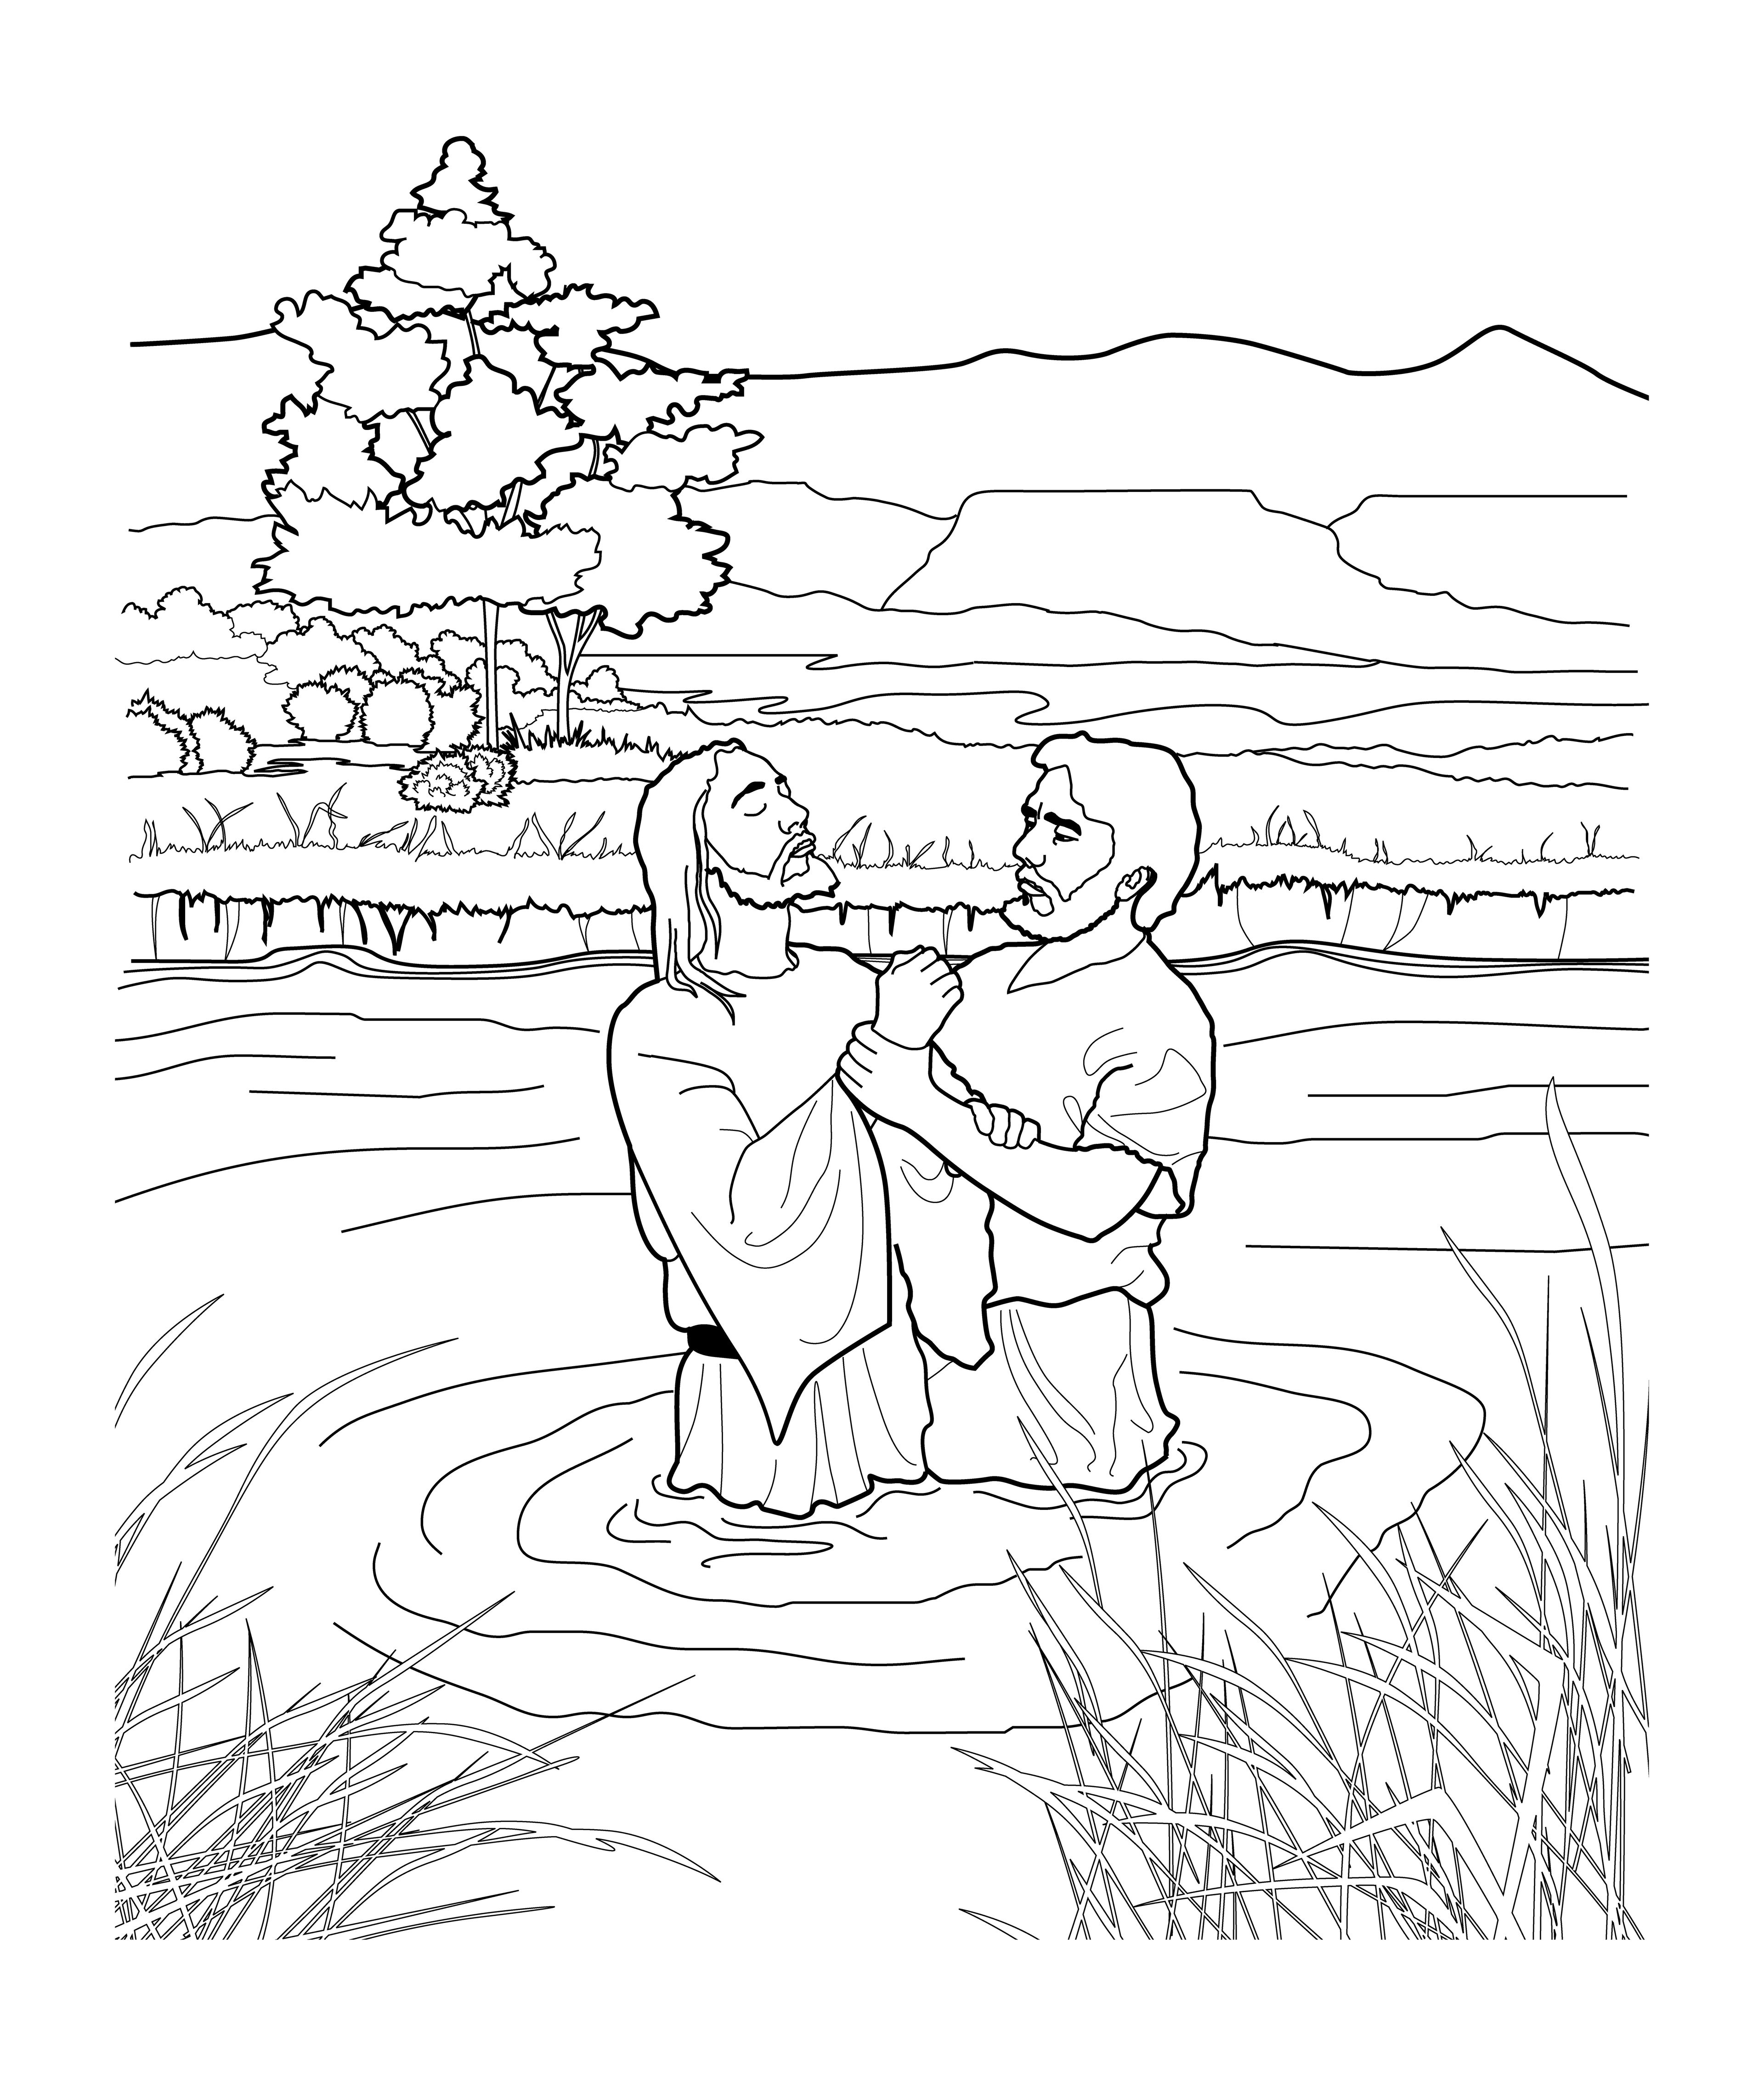 A sketch of John baptizing Jesus, based on the painting by Harry Anderson.